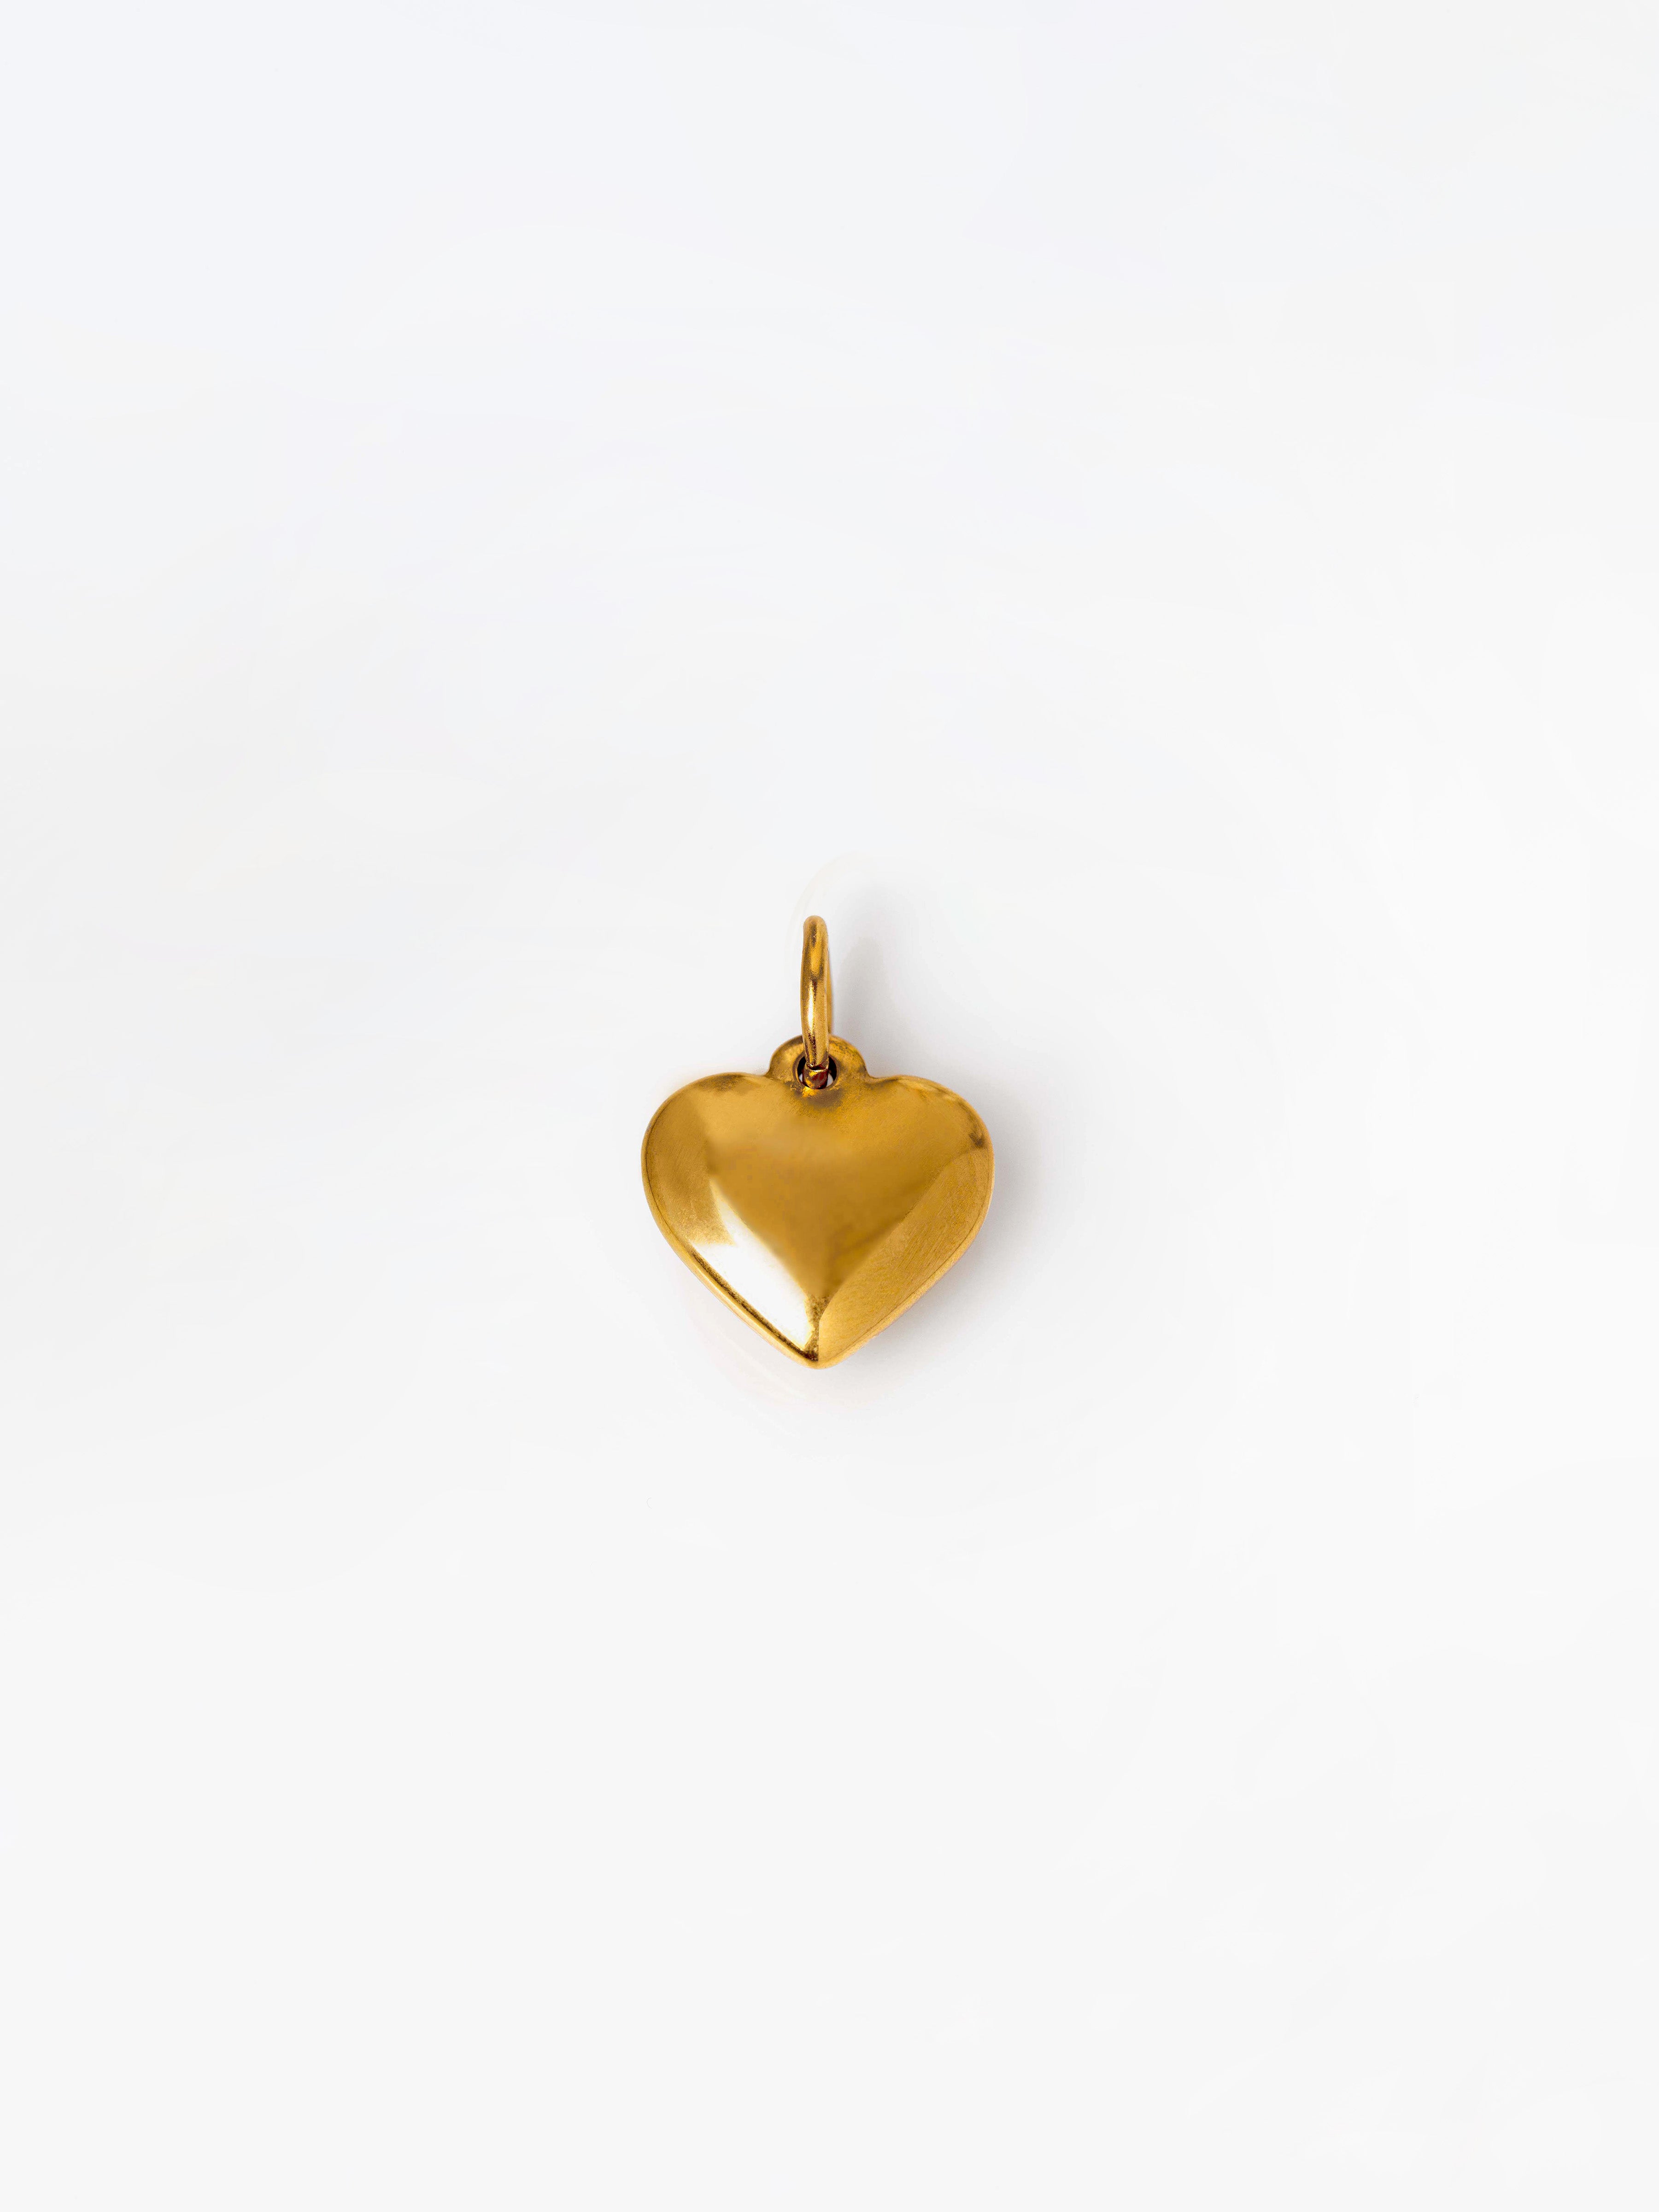 Gold Solid Heart Pendant / Charm